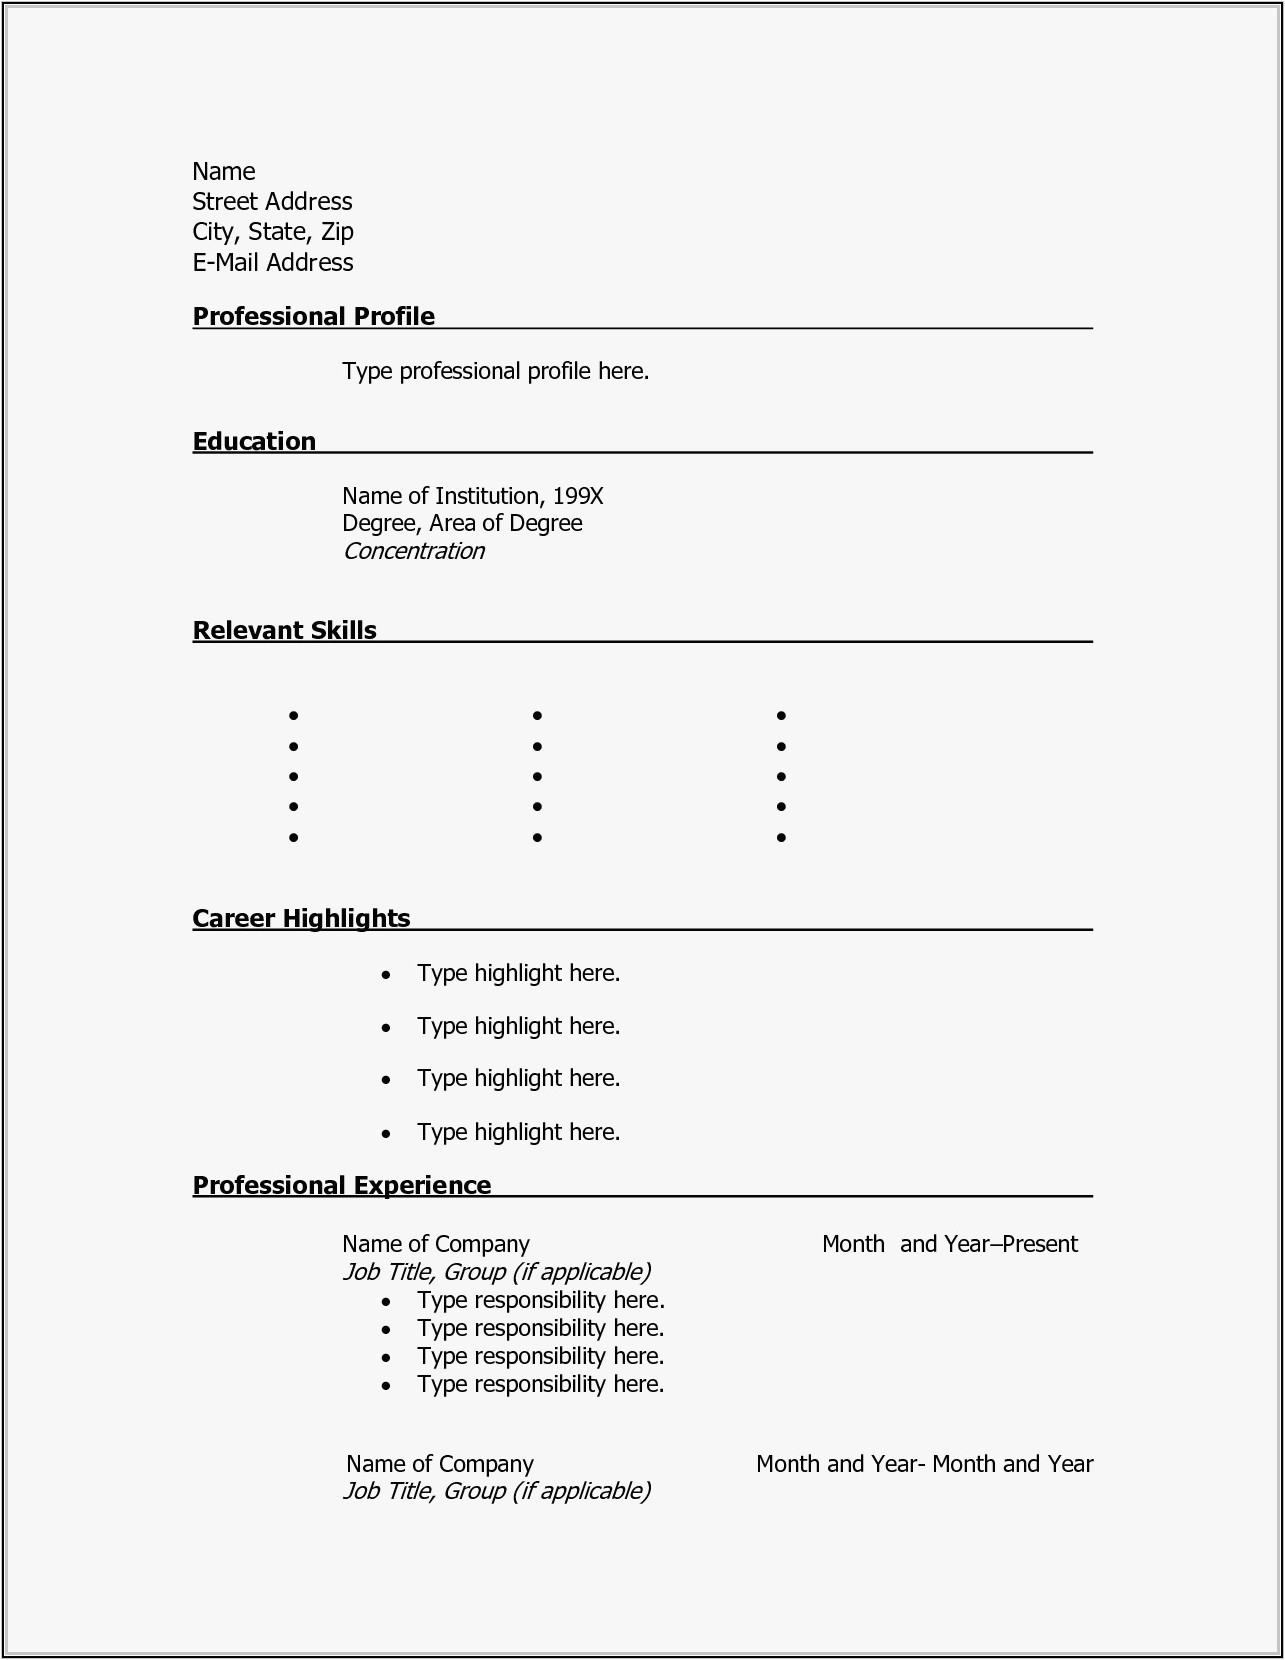 blank resume to fill out and print